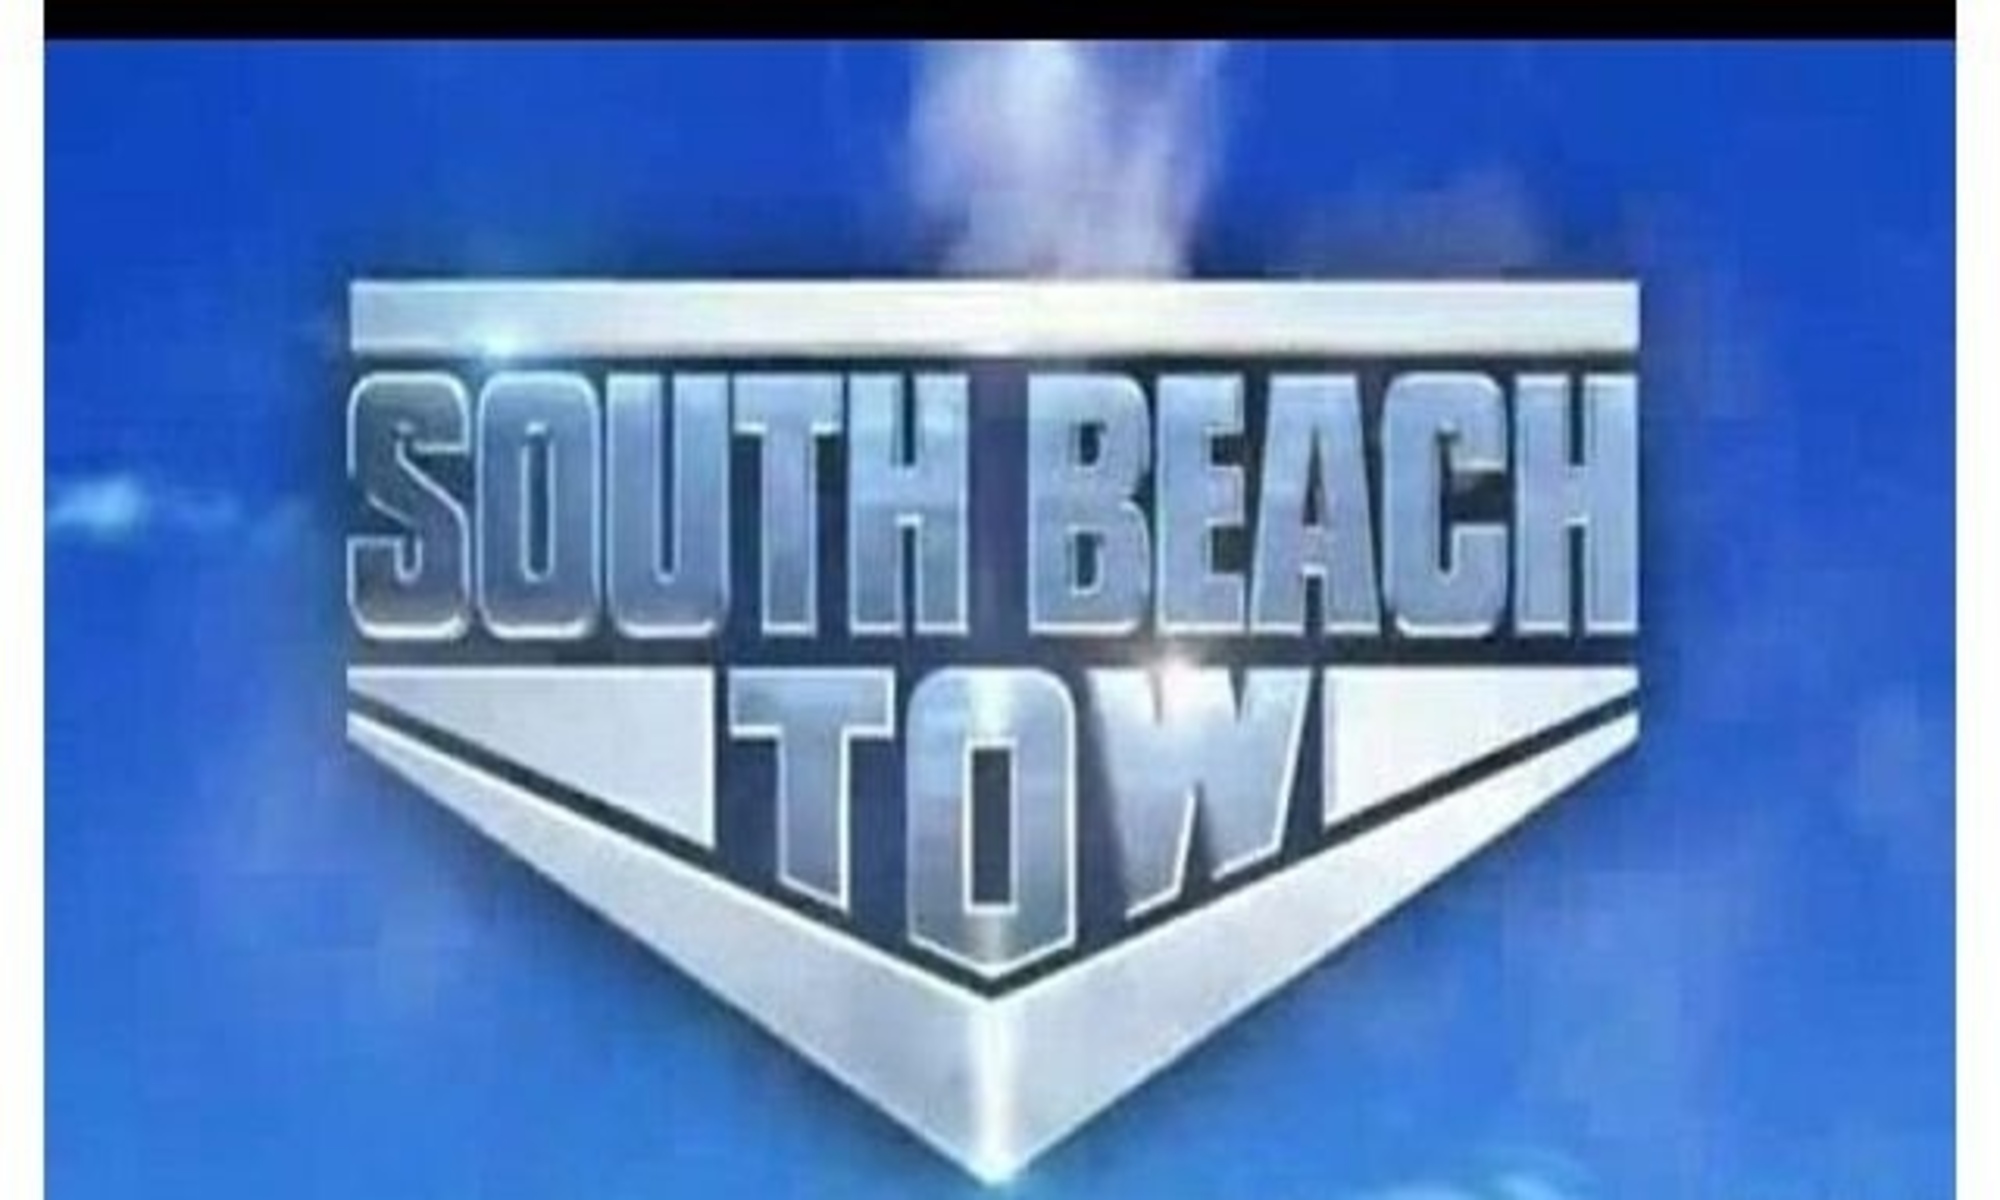 South Beach Tow is claimed to be scripted, which is criticized by the viewers.